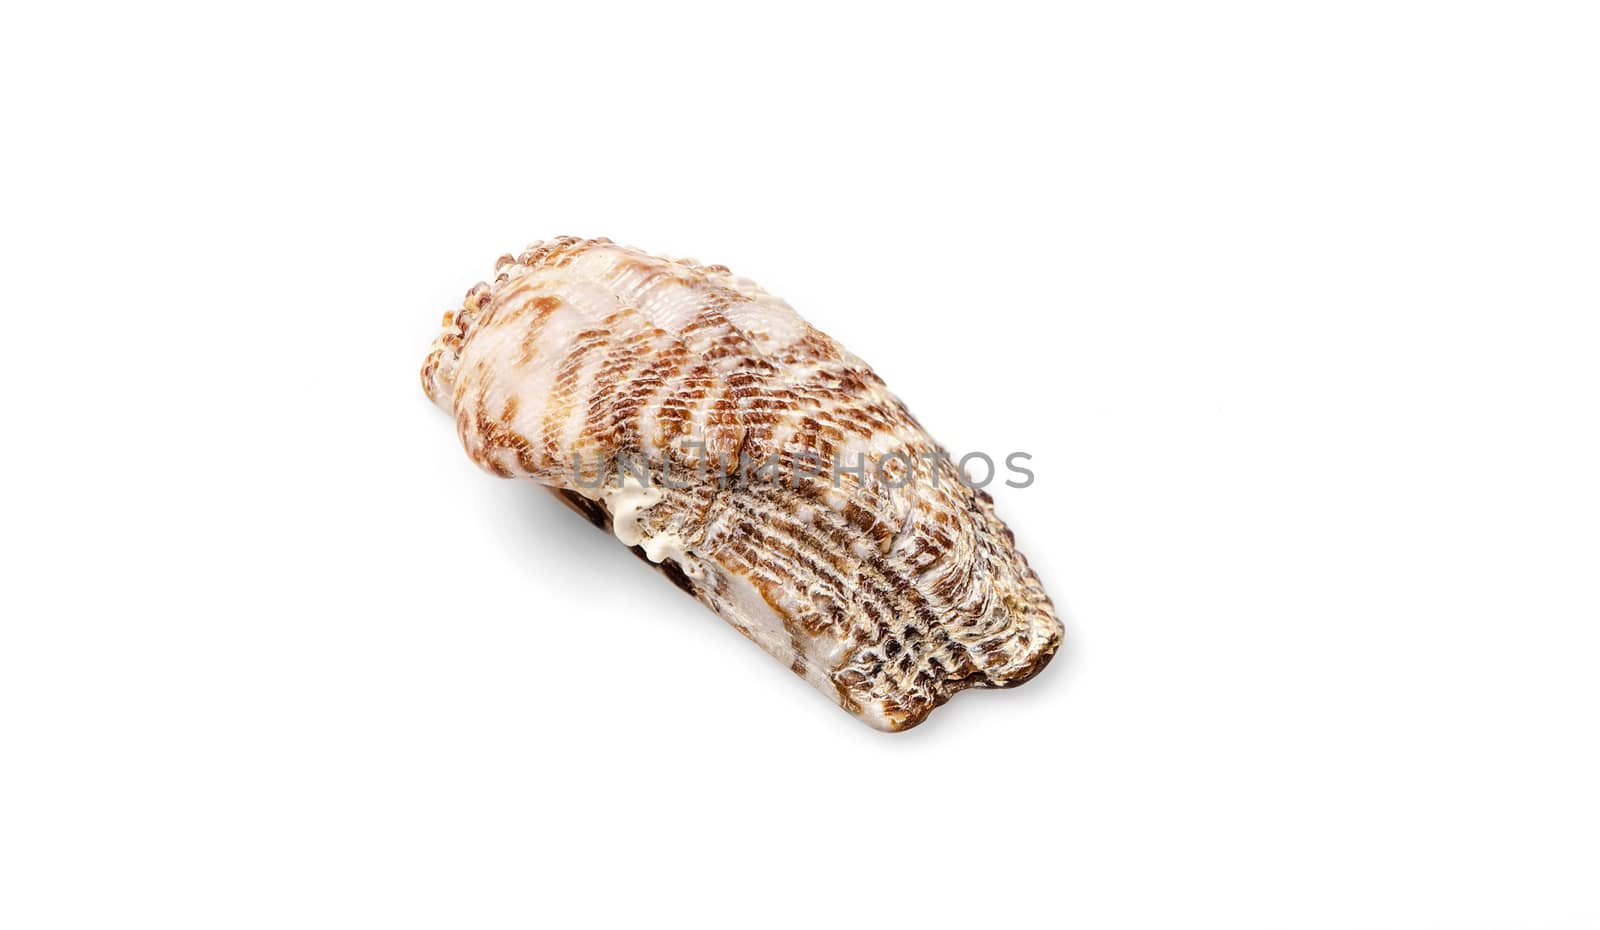 Half of a seashell isolated on white background.